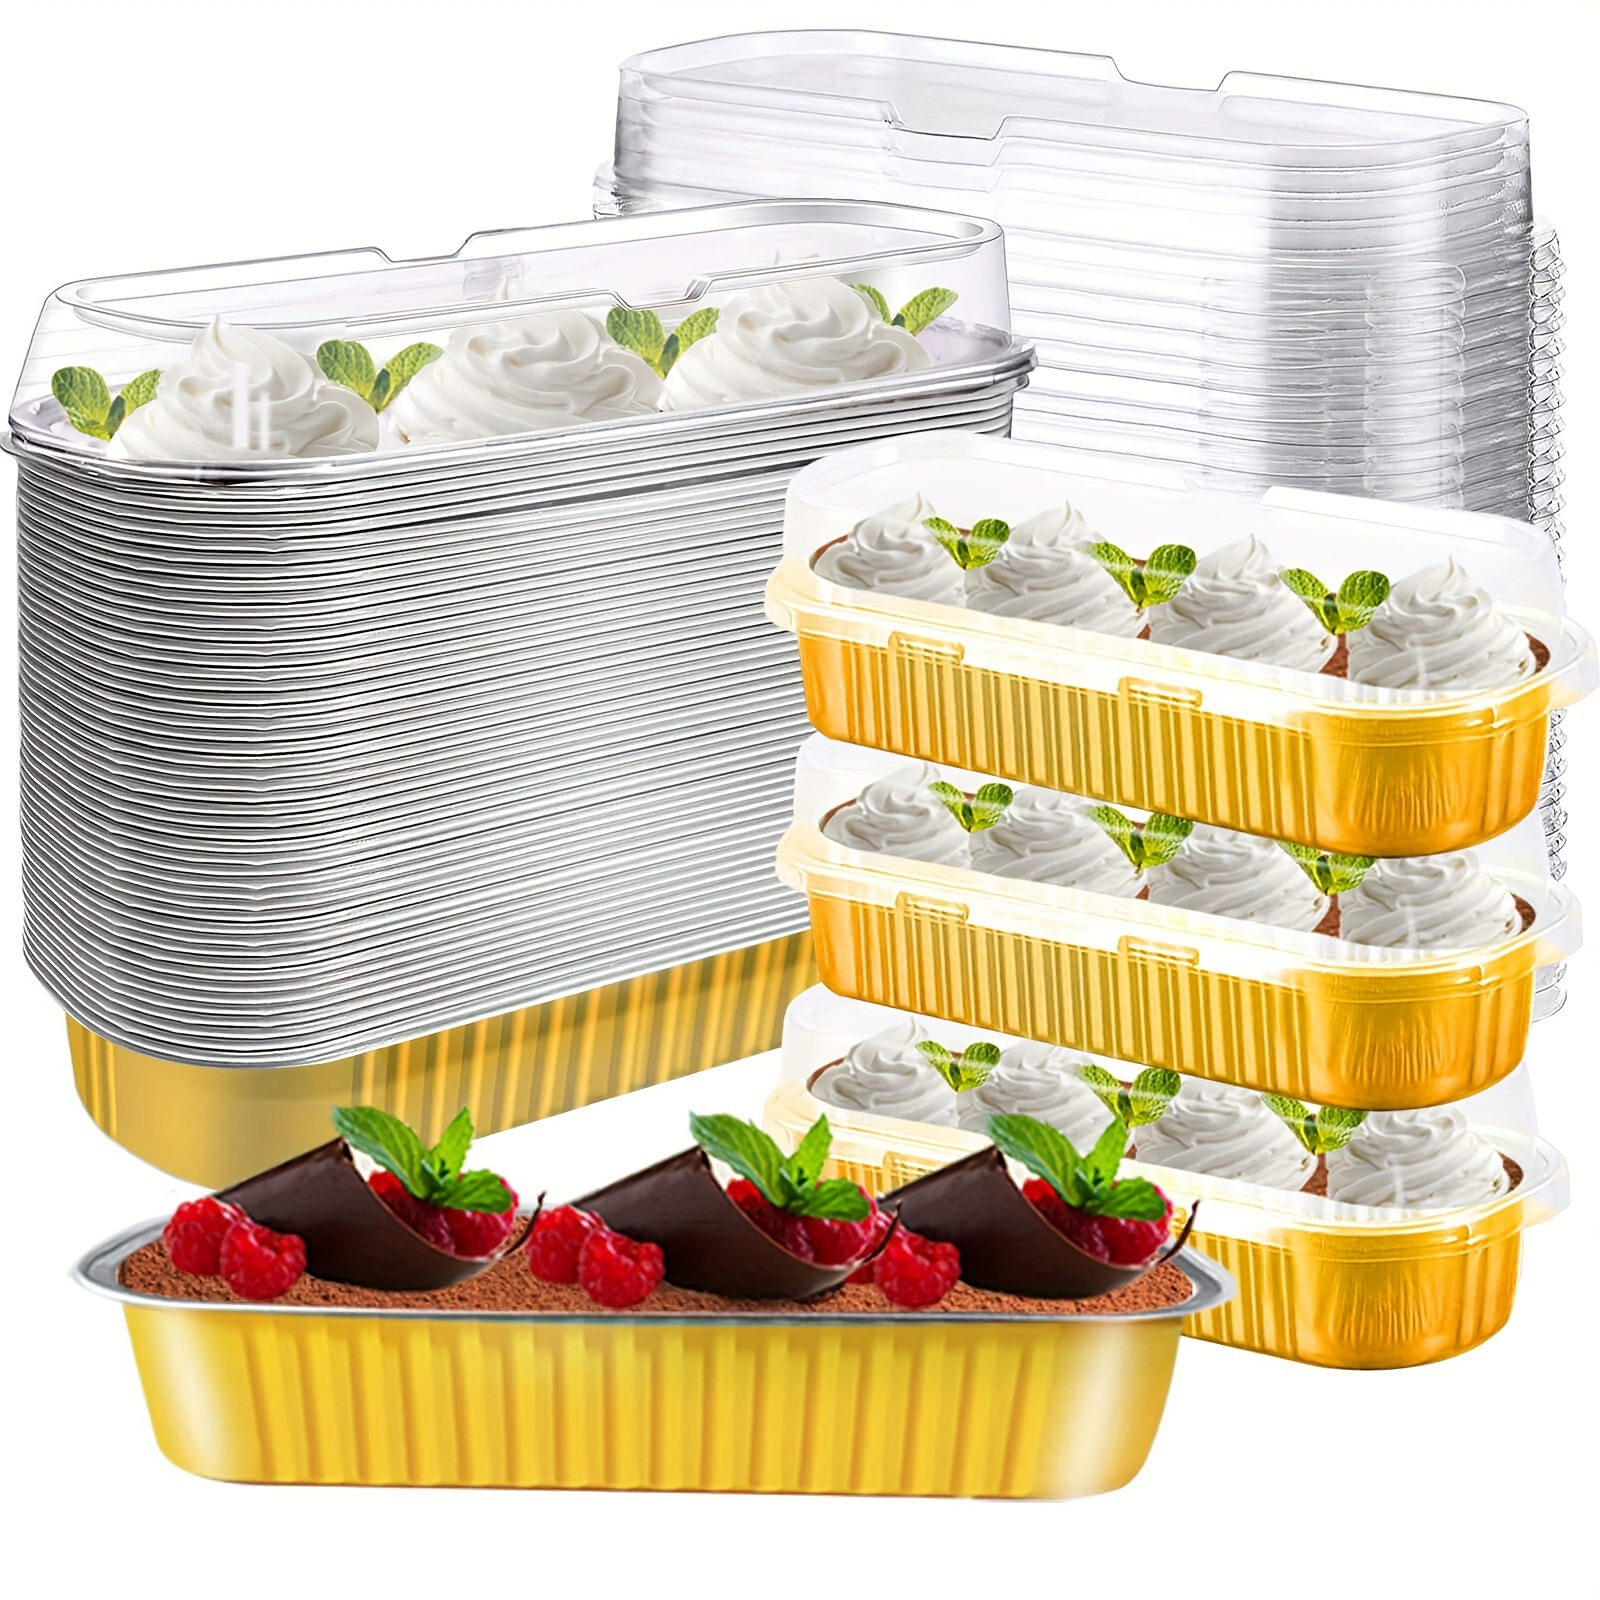 

50-piece Disposable Aluminum Foil Baking Pans With Clear Lids - 6.8oz Mini Cake, Muffin & Brownie Tins For Home Kitchens And Restaurants